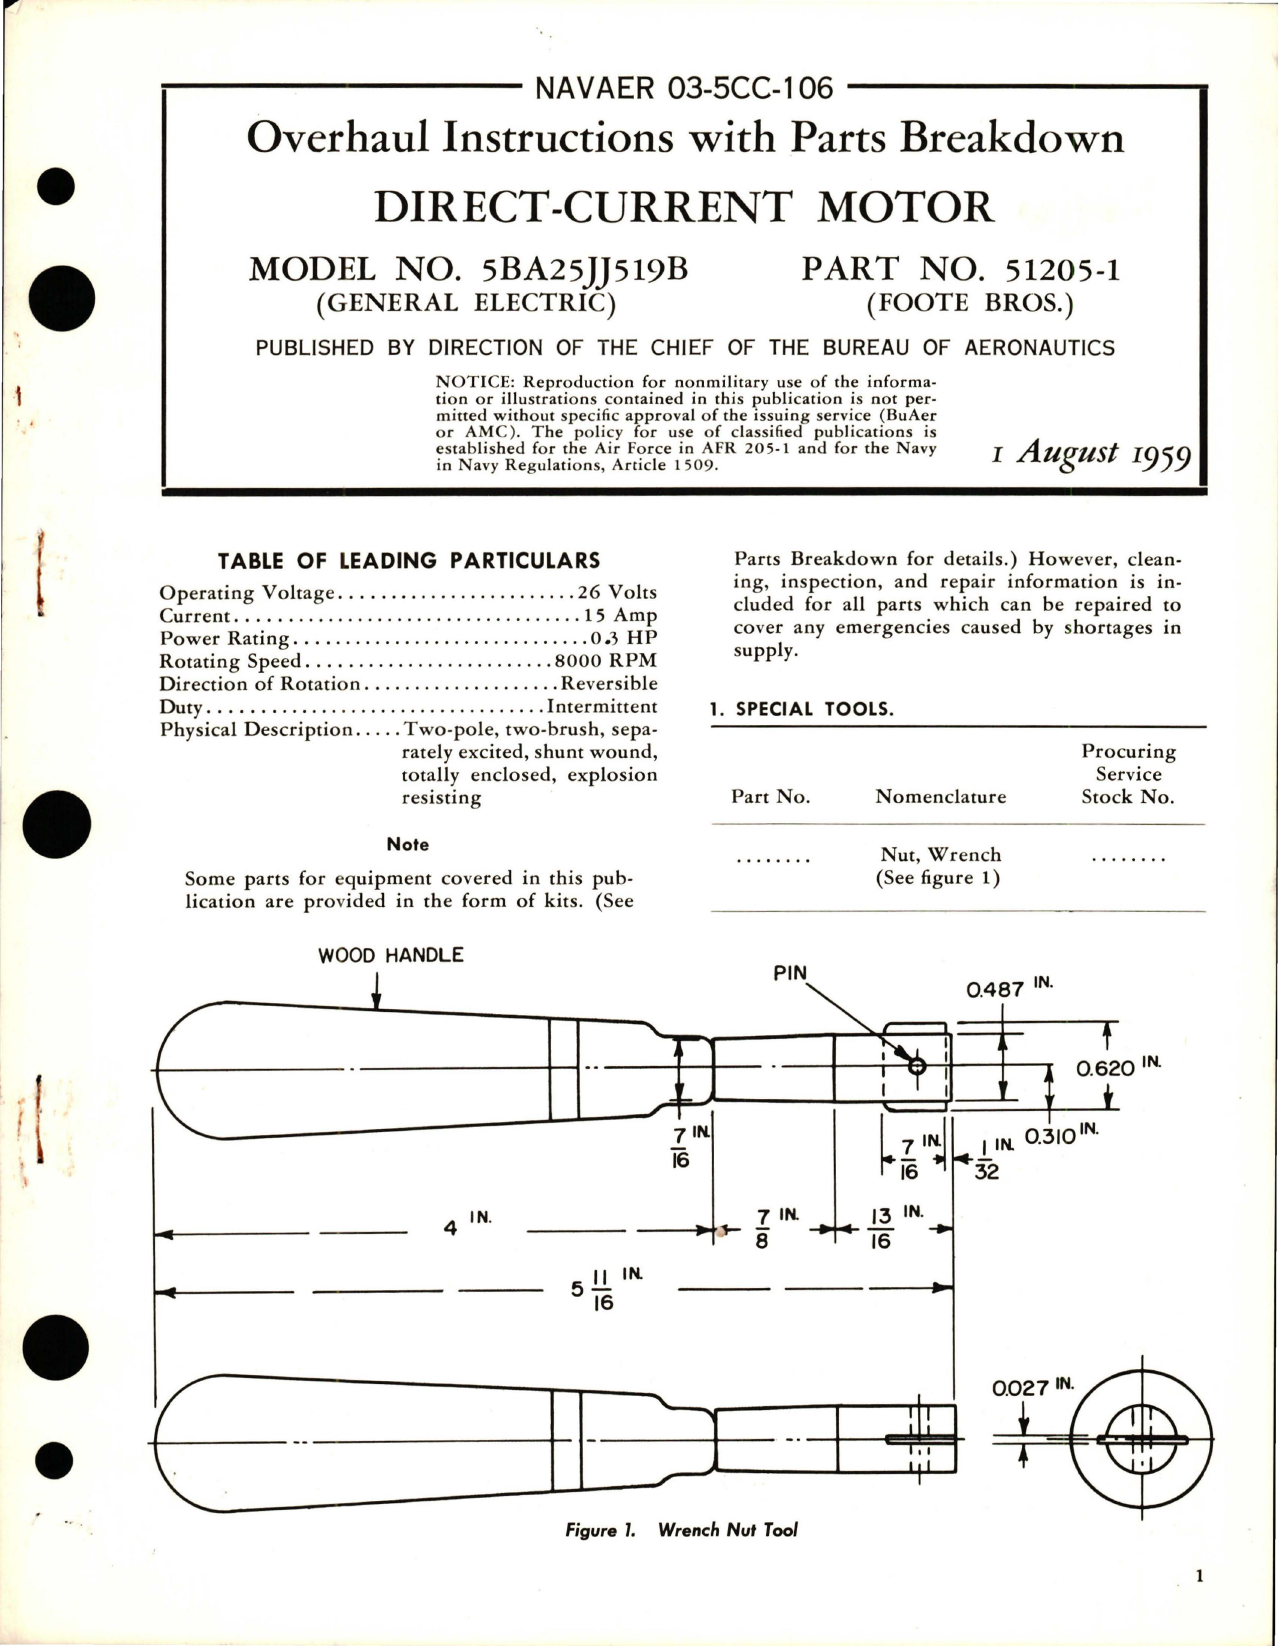 Sample page 1 from AirCorps Library document: Overhaul Instructions with Parts Breakdown for Direct-Current Motor - Model 5BA25JJ519B - Part 51205-1 